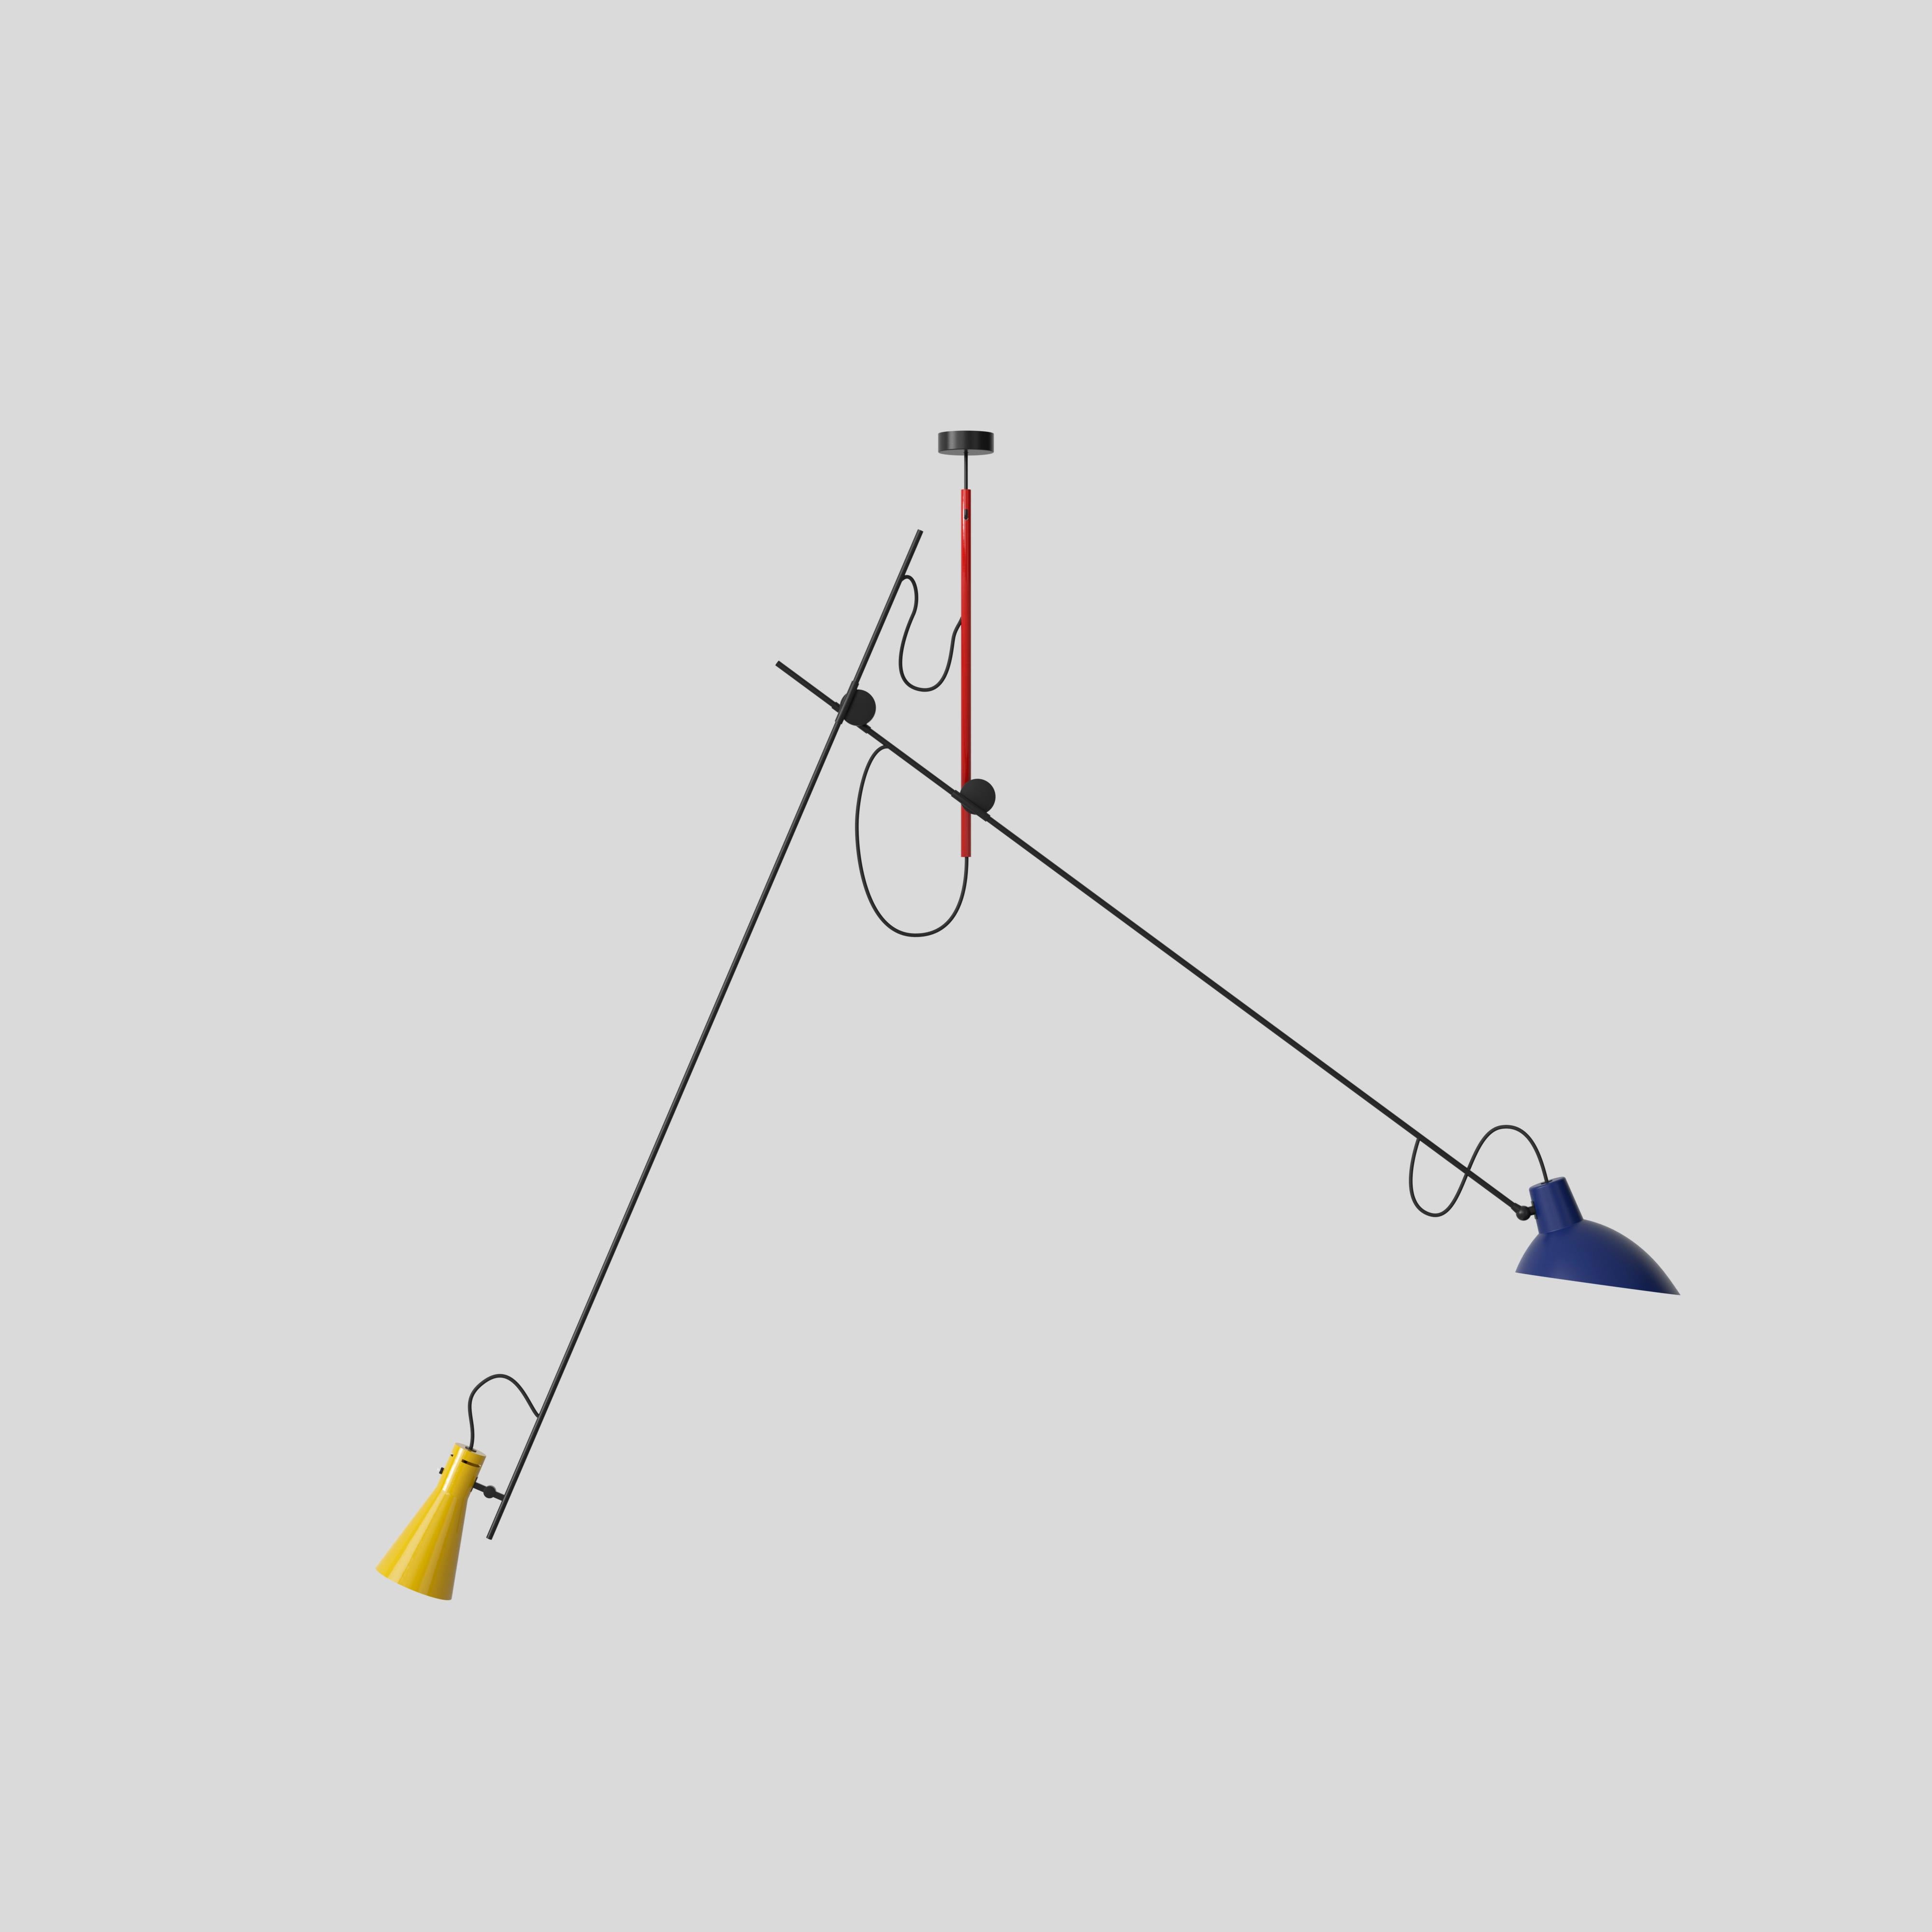 VV Cinquanta suspension lamp
Design by Vittoriano Viganò
This version is special edition with mondrian colors

The VV Cinquanta suspension is elegant and versatile with two posable direct light sources.

With a distinctive dual-stemmed